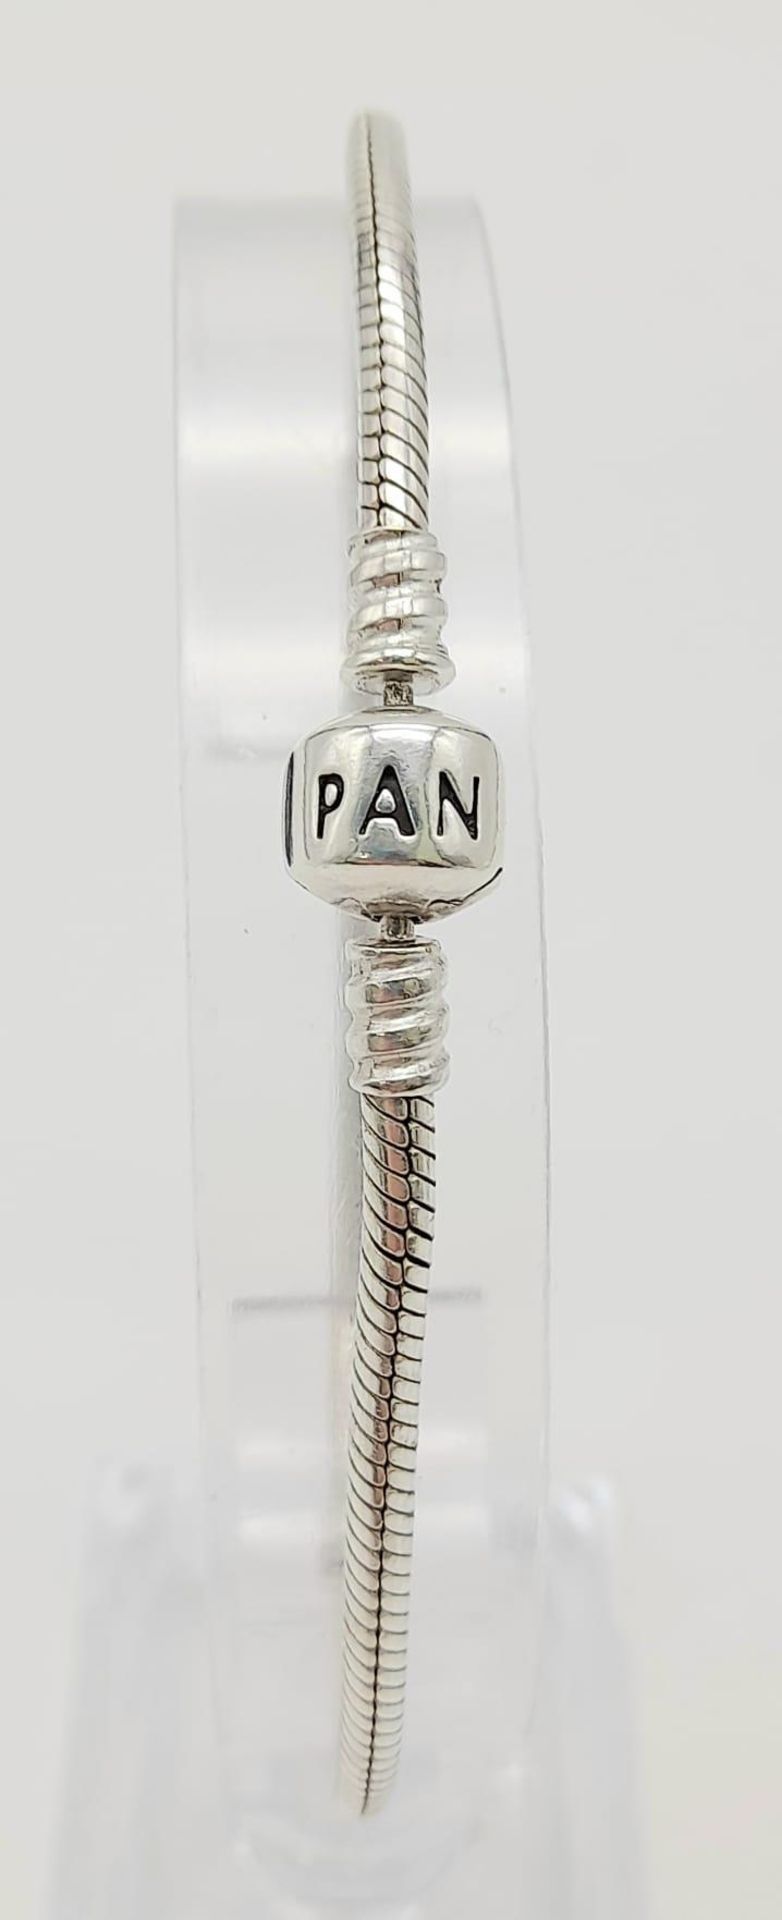 PANDORA STERLING SILVER MOMENTS BRACELET, WEIGHT 17G - Image 2 of 4